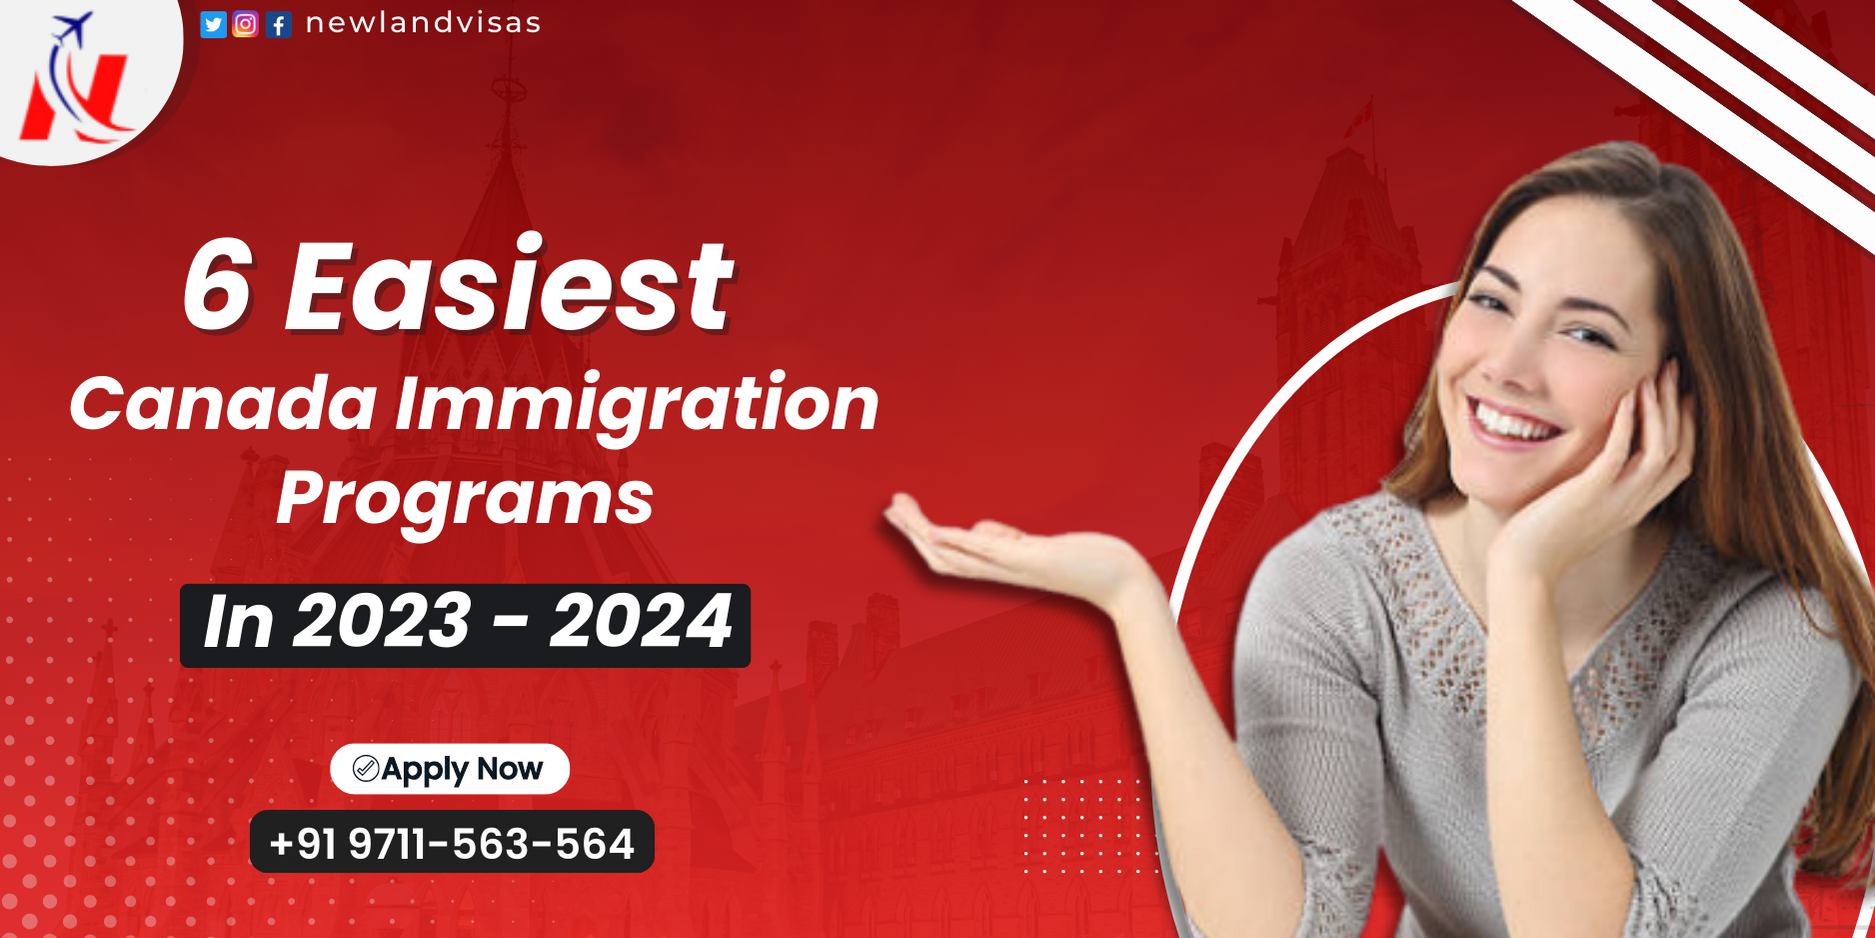 6 Easiest Canada Immigration Programs in 2023-2024